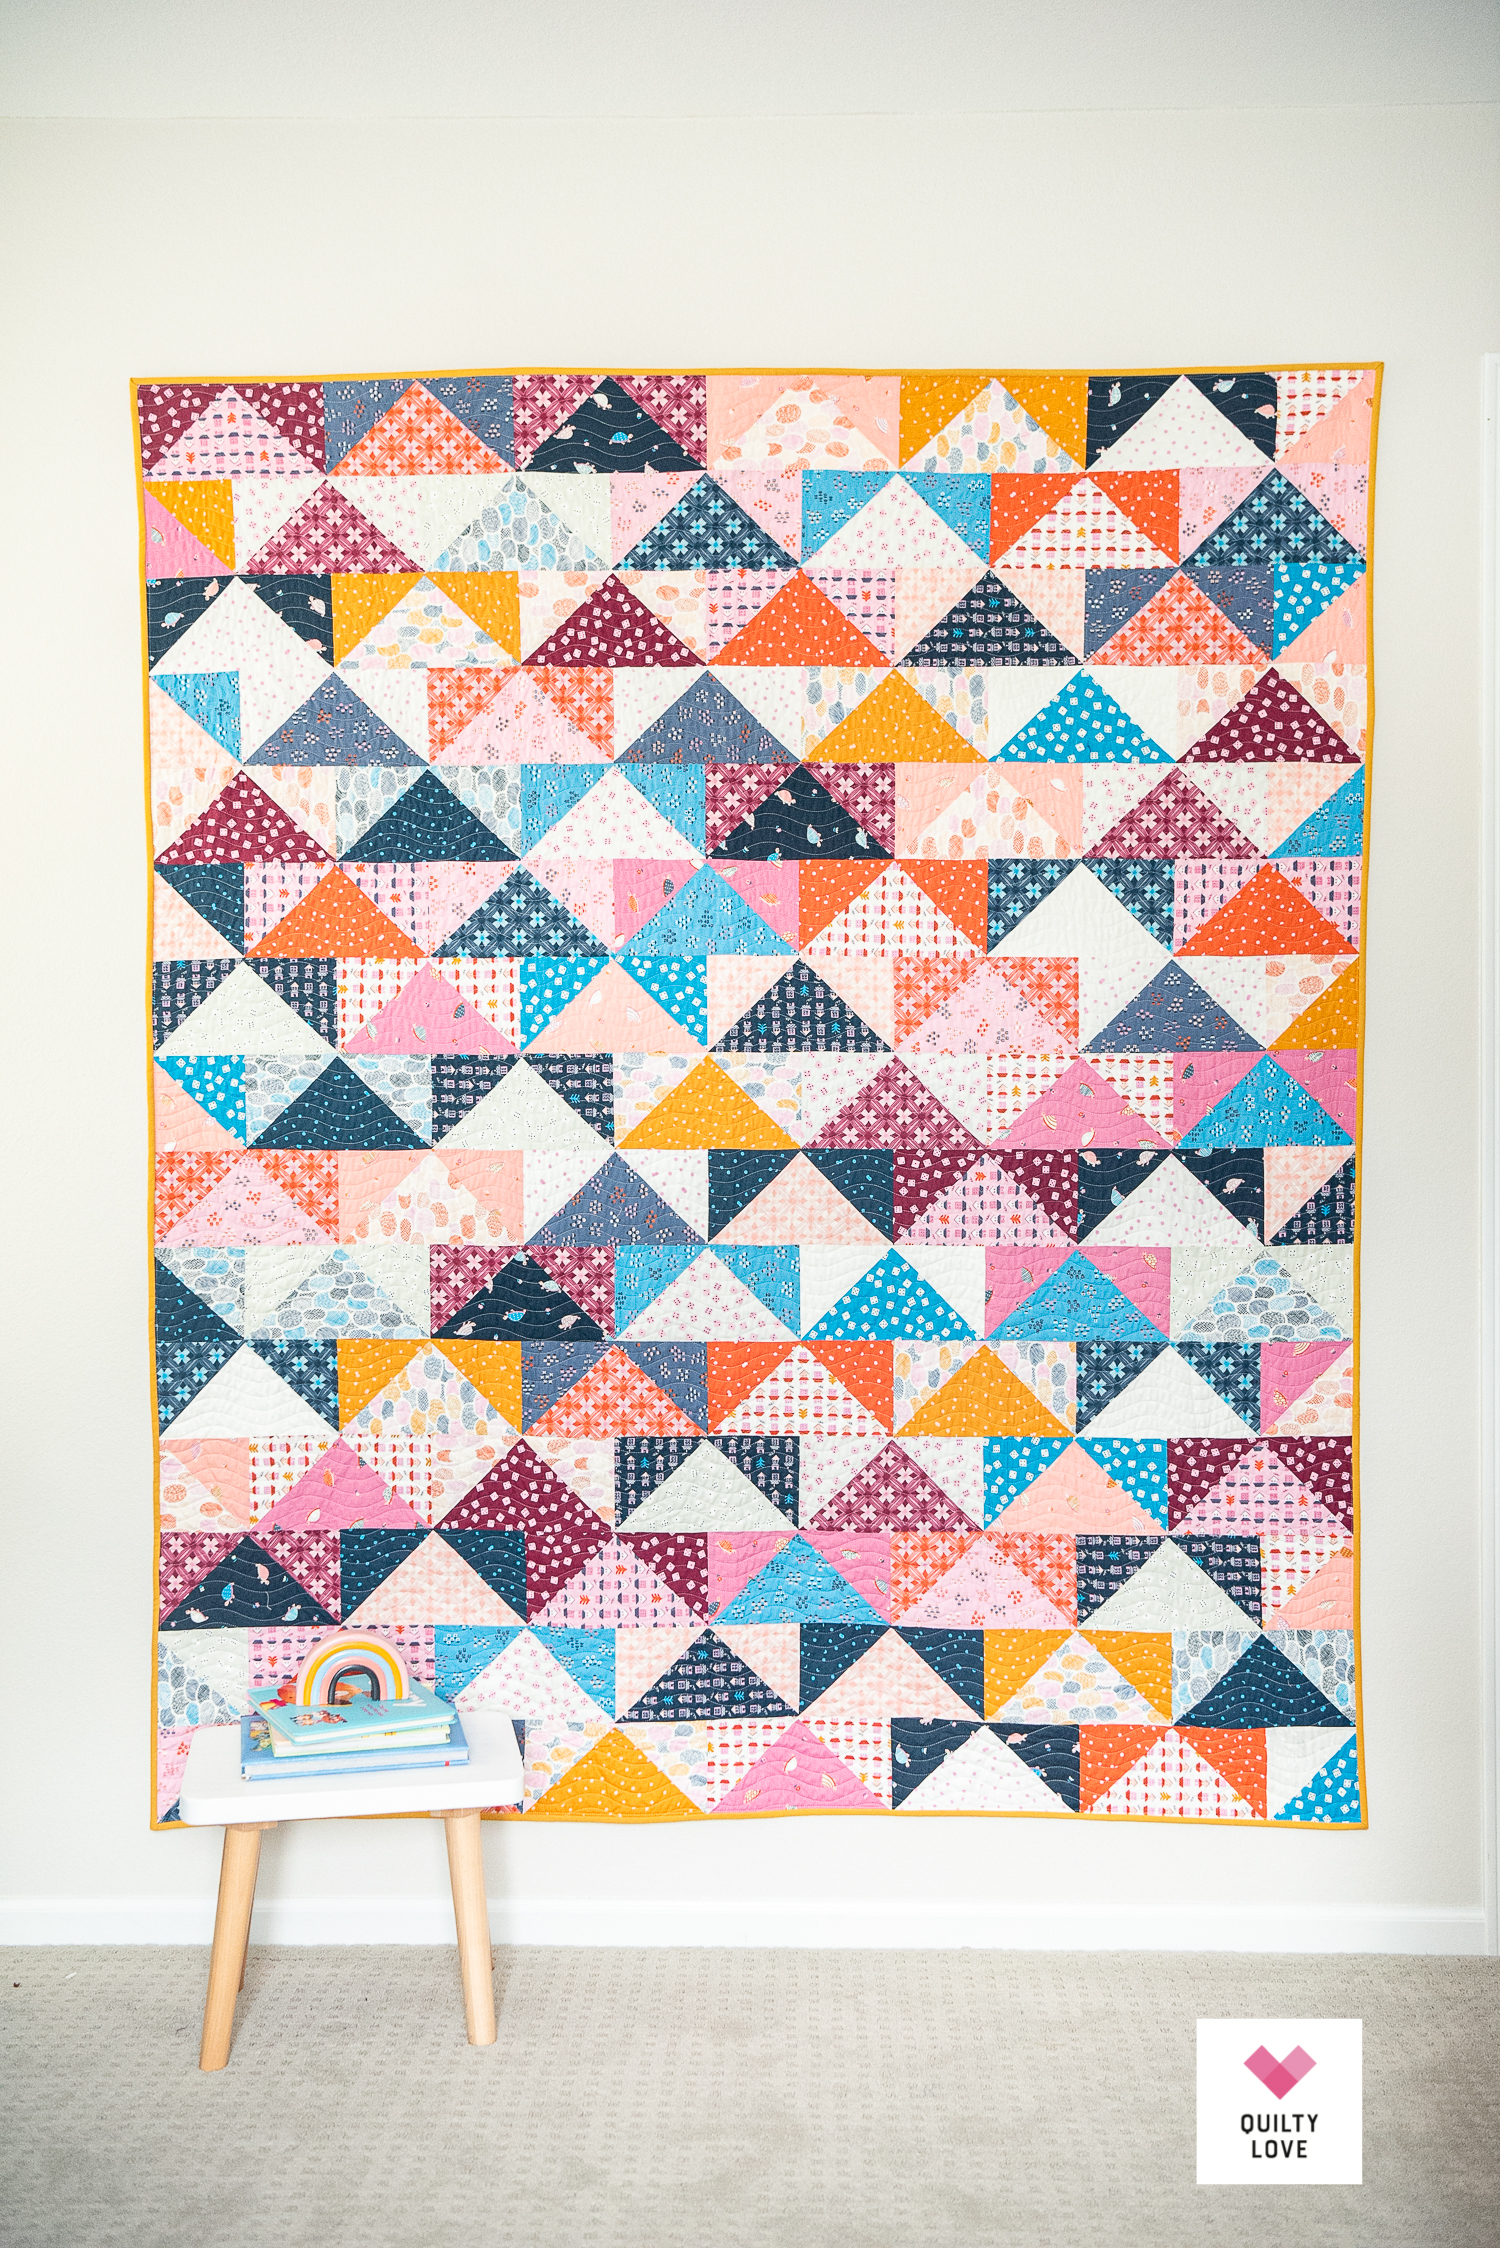 Patchwork Flying Geese Quilt - A Stash Buster quilt pattern